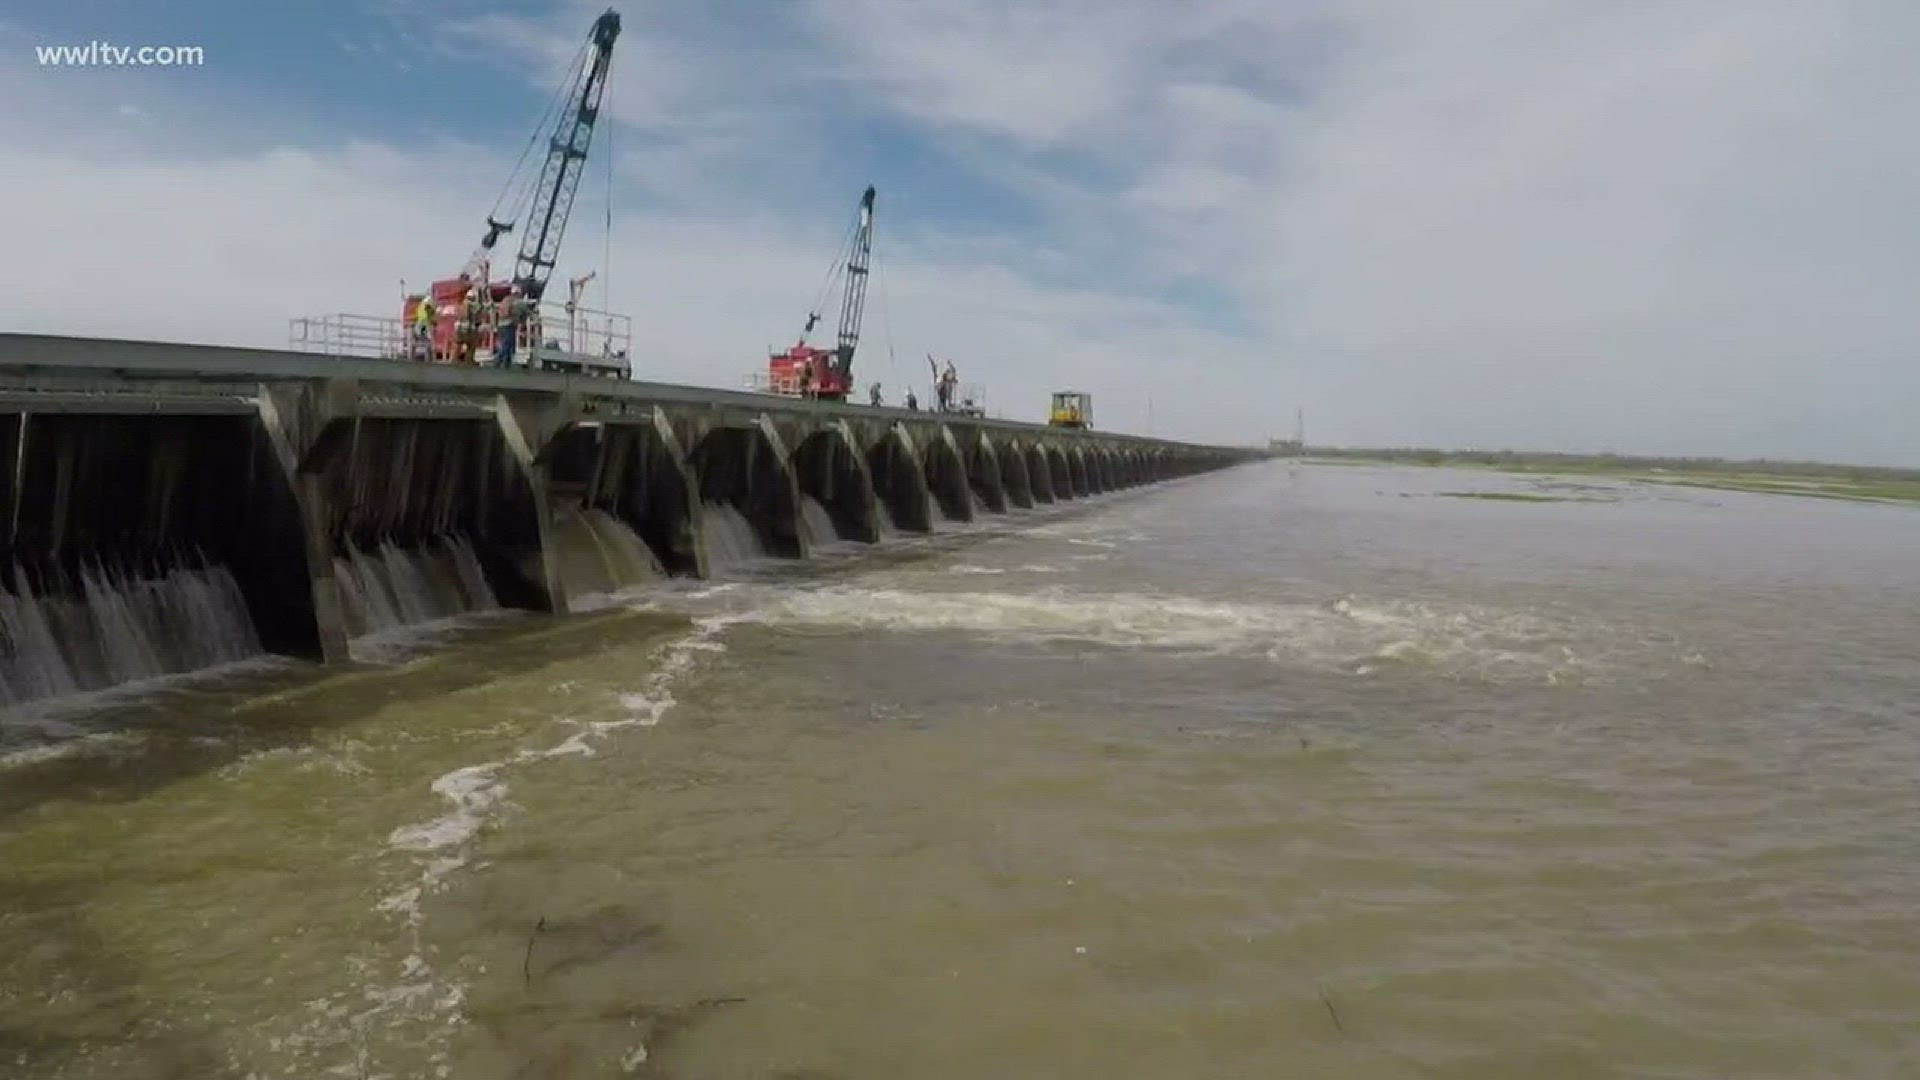 The Bonnet Carre Spillway opened this morning for the 12th time in its history.